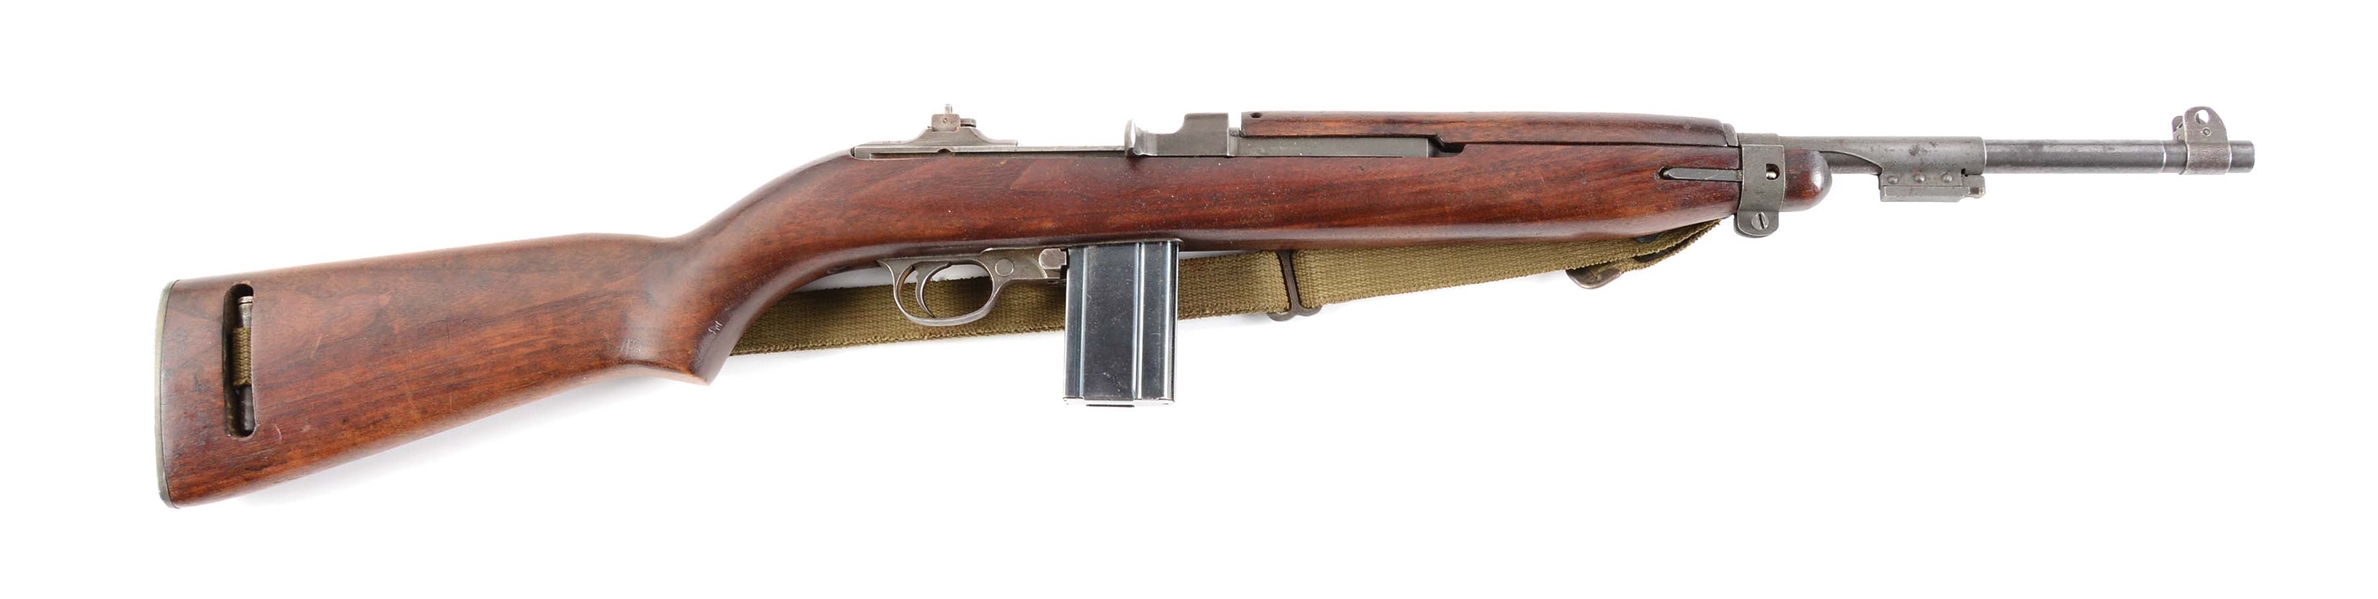 (C) US WINCHESTER M1 CARBINE .30 SEMI AUTOMATIC RIFLE WITH CARRY BAG, BAYONET, EXTRA MAGAZINE, BAYONET AND MUZZLE COVER